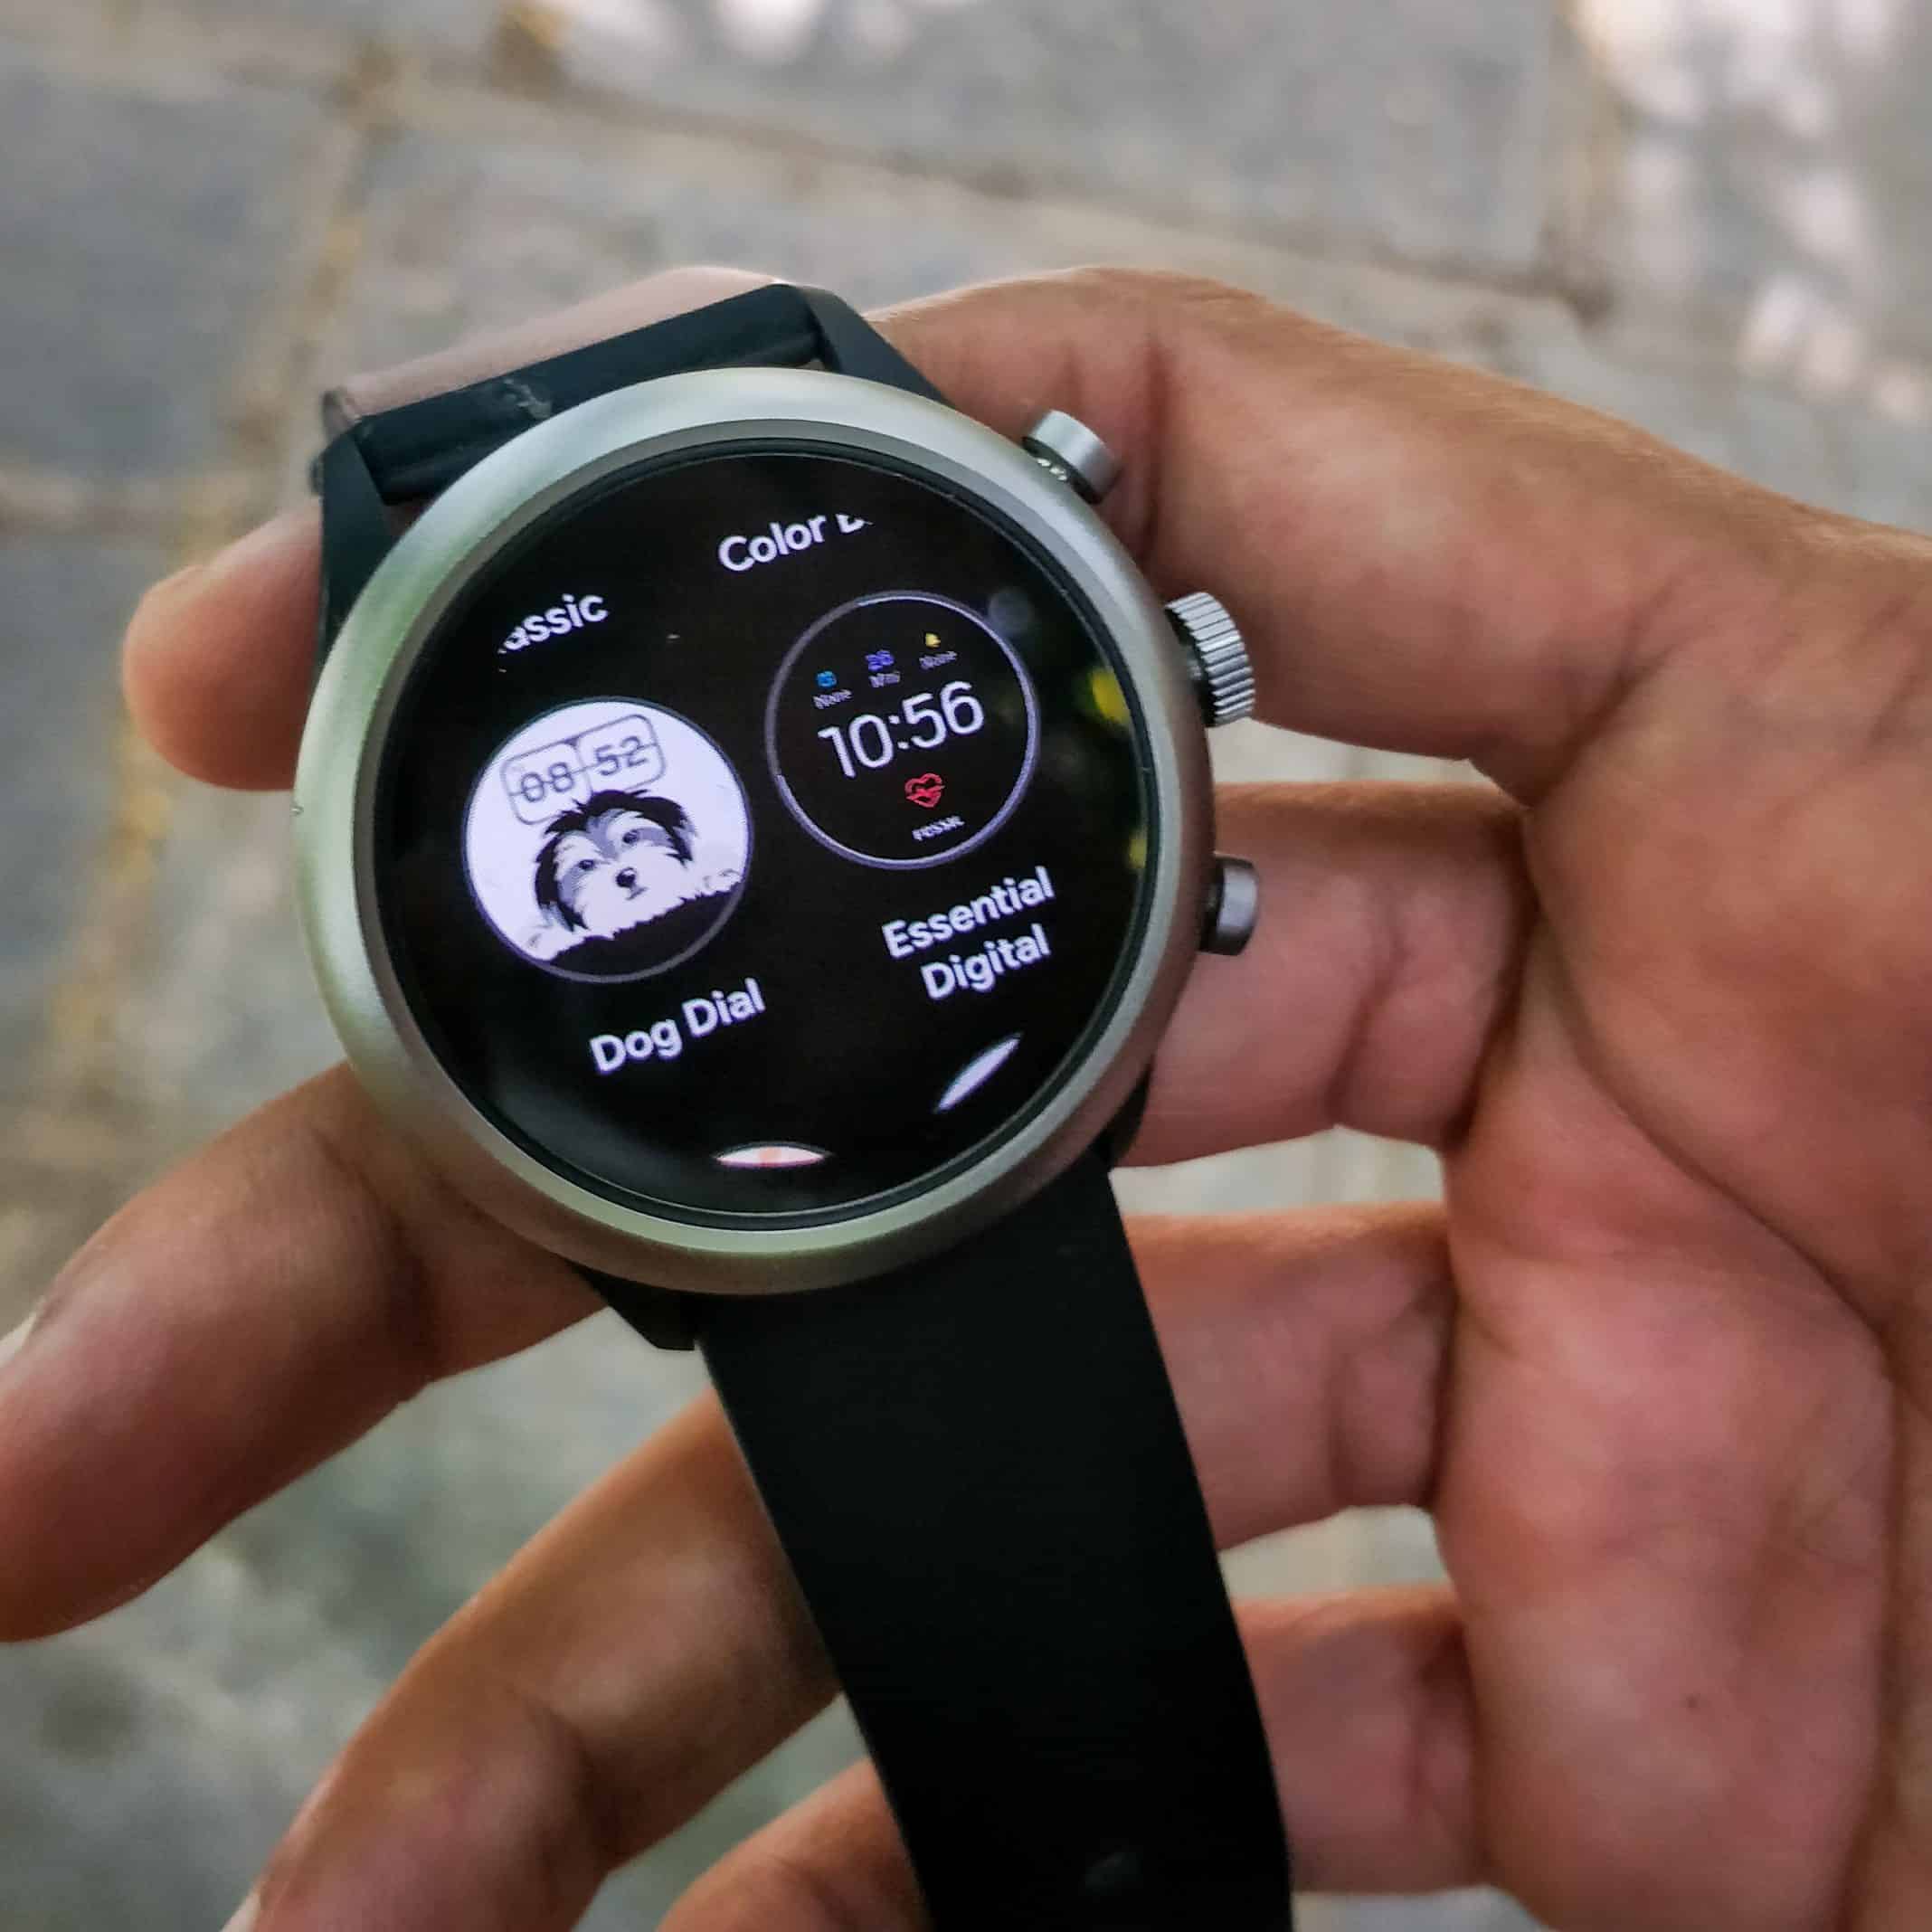 Fossil Sport Review - Bringing Out The Fitness Beast In You | IGadgetsworld